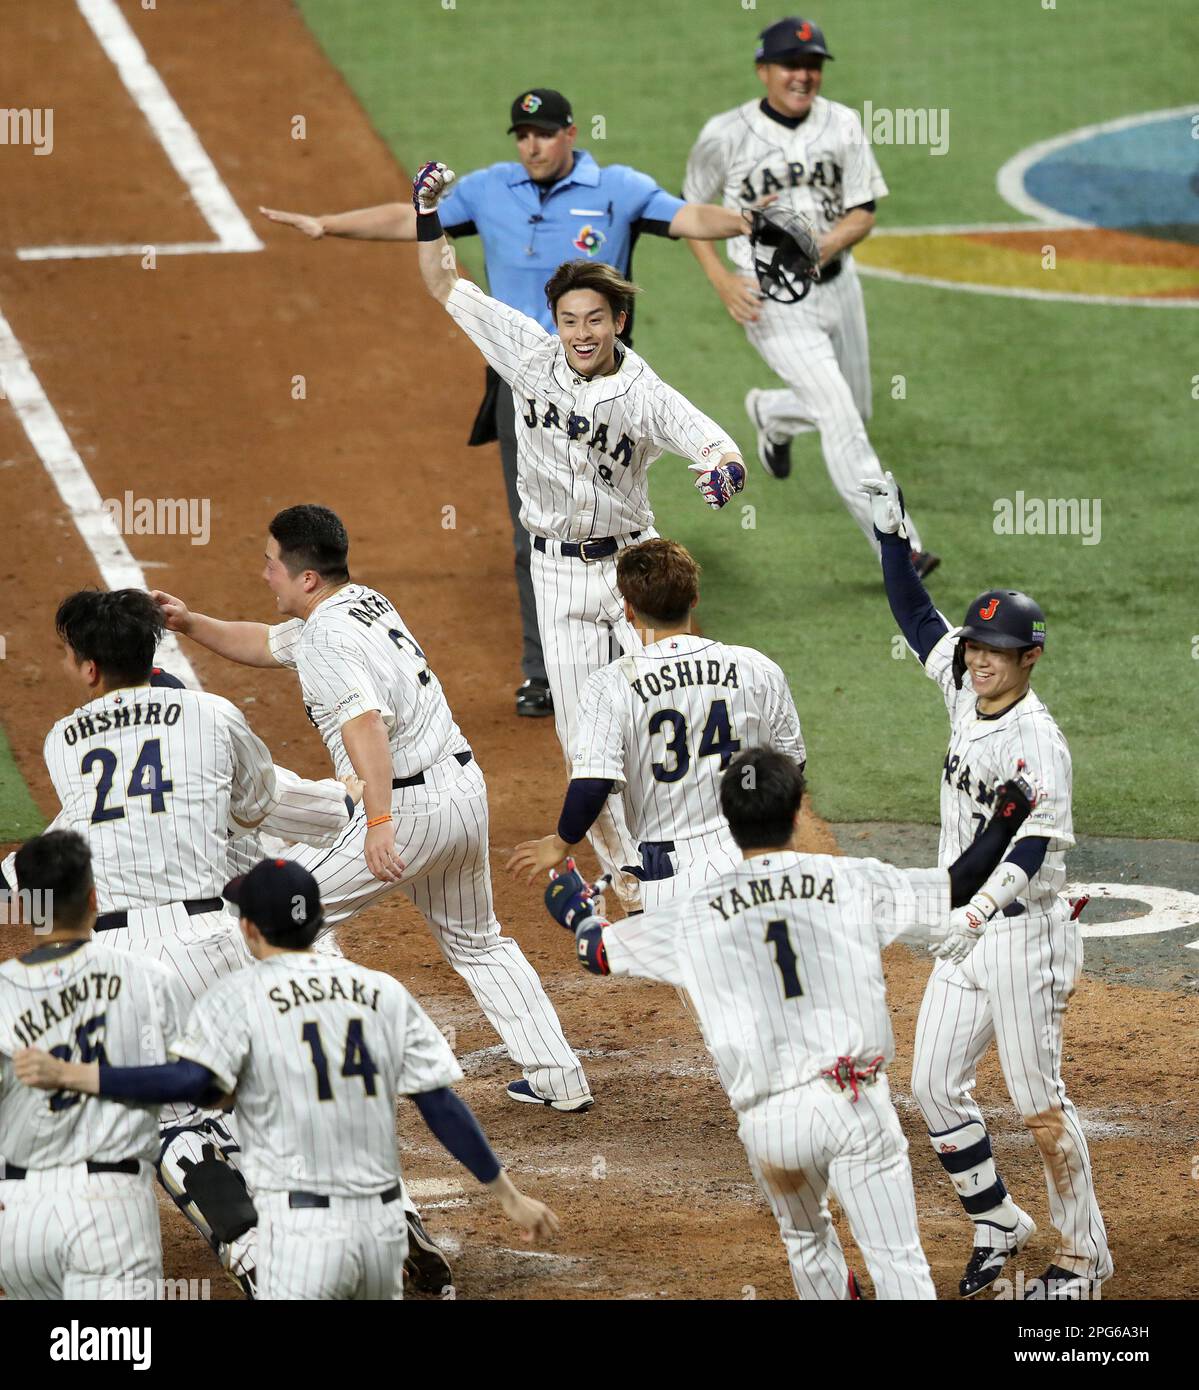 Miami, United States. 20th Mar, 2023. Japan's Ukyo Shuto (9) celebrates after scoring the game winning run off of Munetaka Murakami's (55) hit in the ninth inning of the 2023 World Baseball Classic semifinal game against Mexico in Miami, Florida on Monday, March 20, 2023. Photo by Aaron Josefczyk/UPI Credit: UPI/Alamy Live News Stock Photo